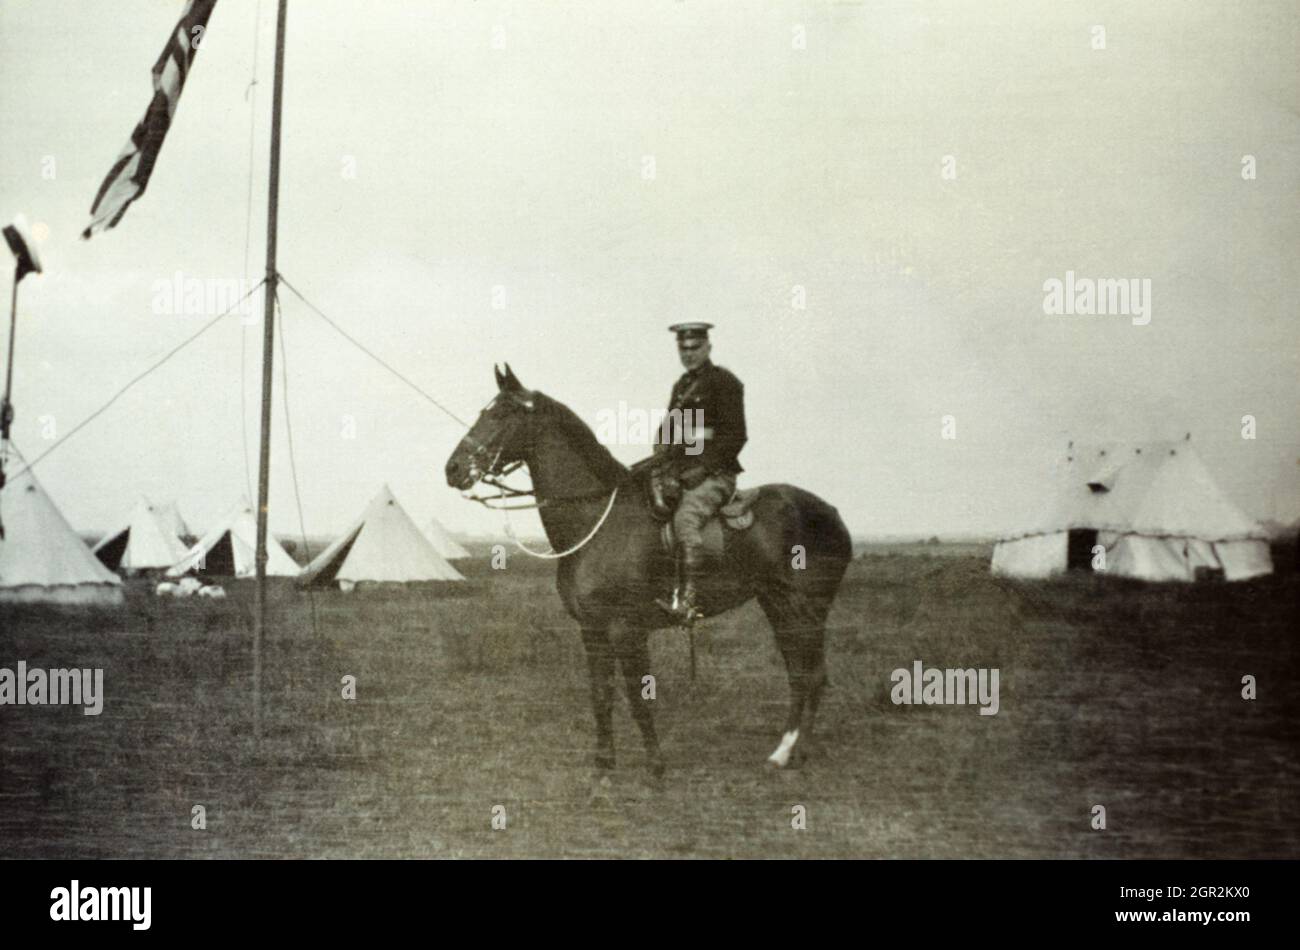 An Edwardian era British army officer mounted on a horse in camp. Stock Photo